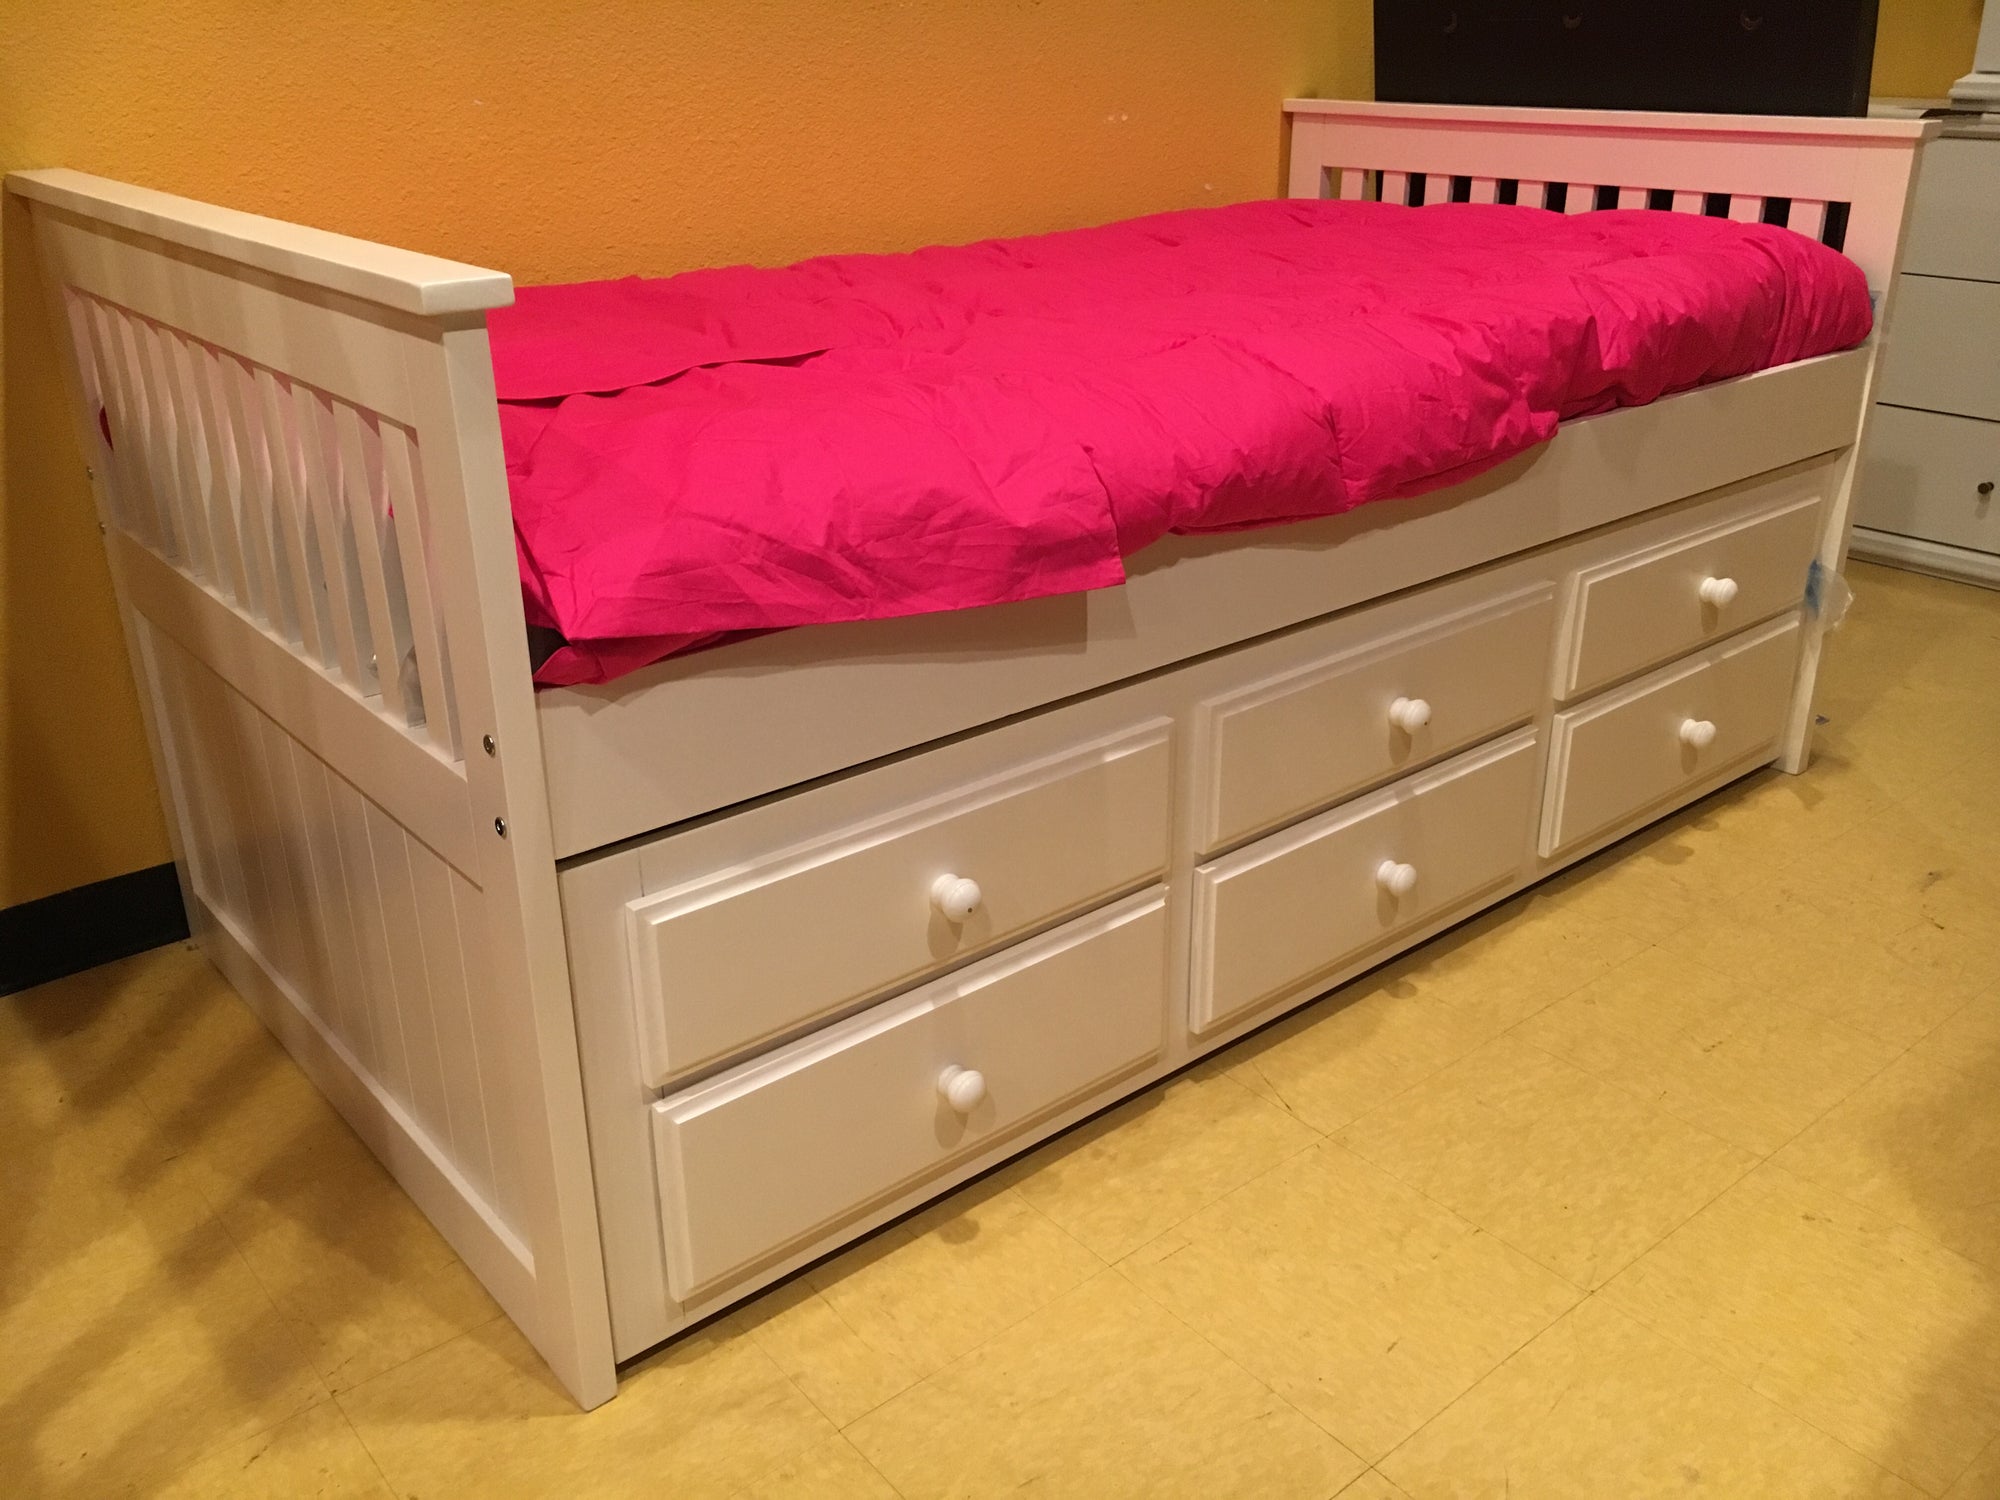 214TW FI-D Twin Mission in White w/Trundle and Drawers